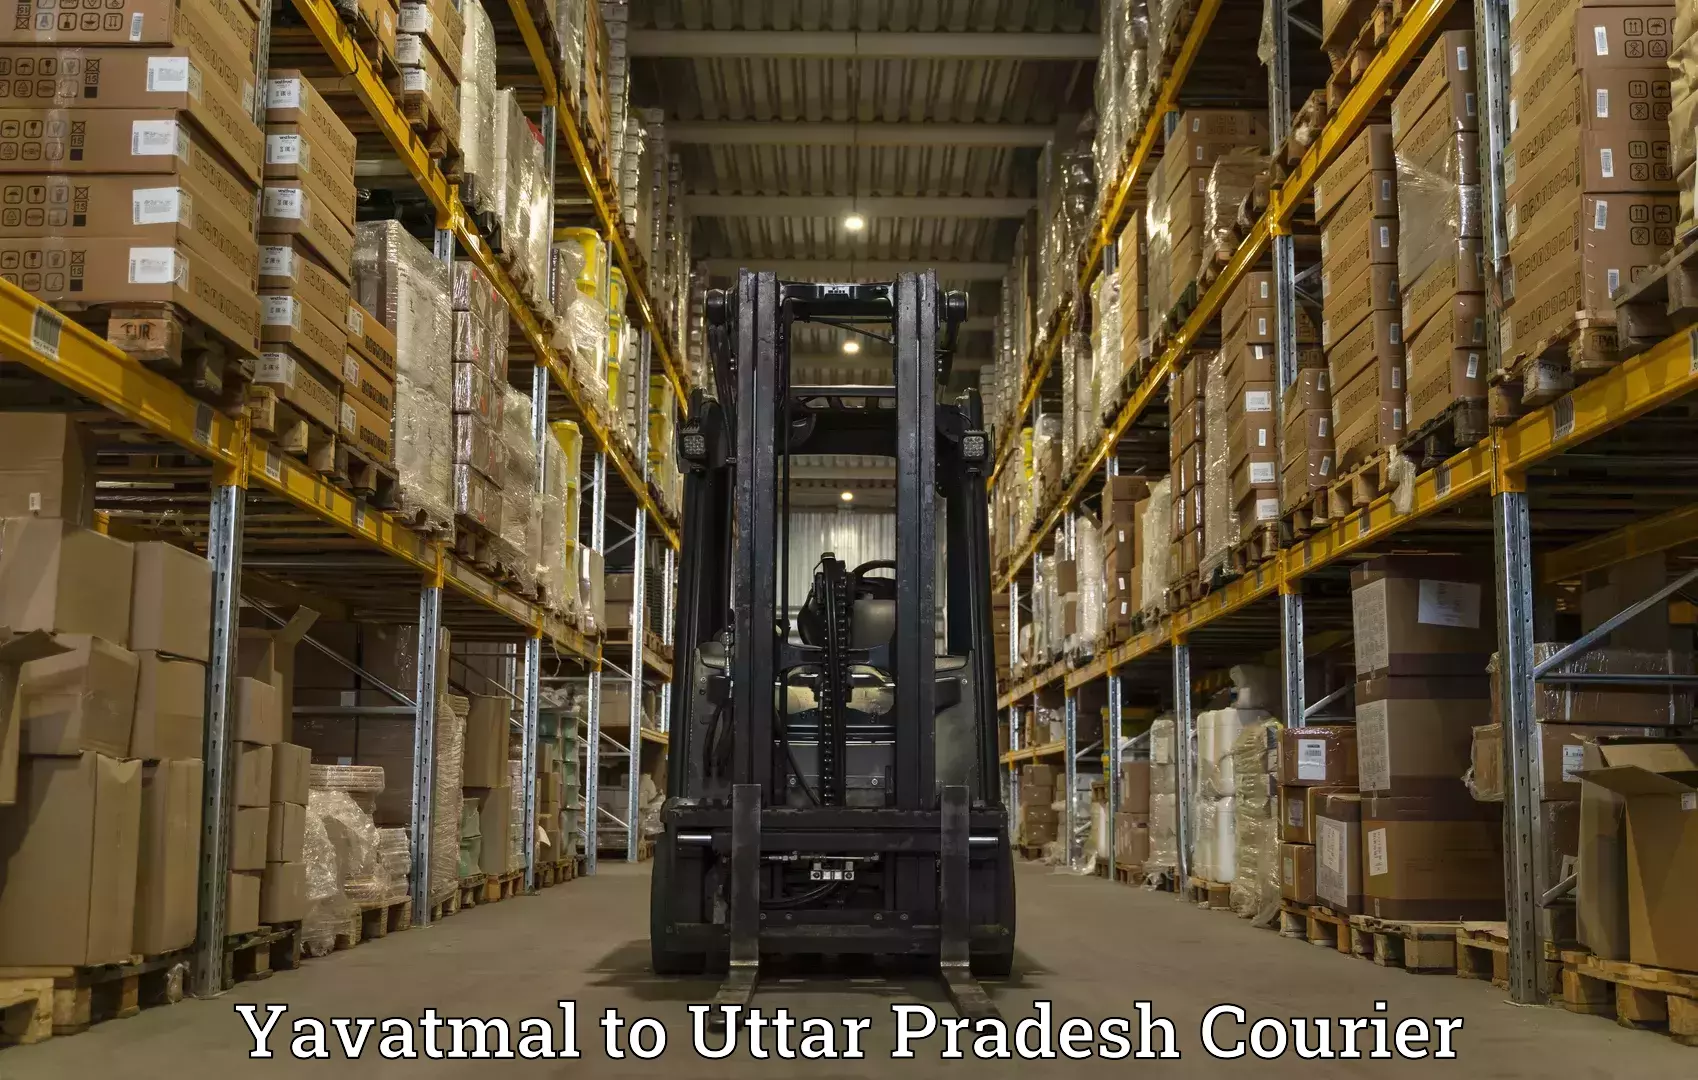 Global freight services Yavatmal to Agra